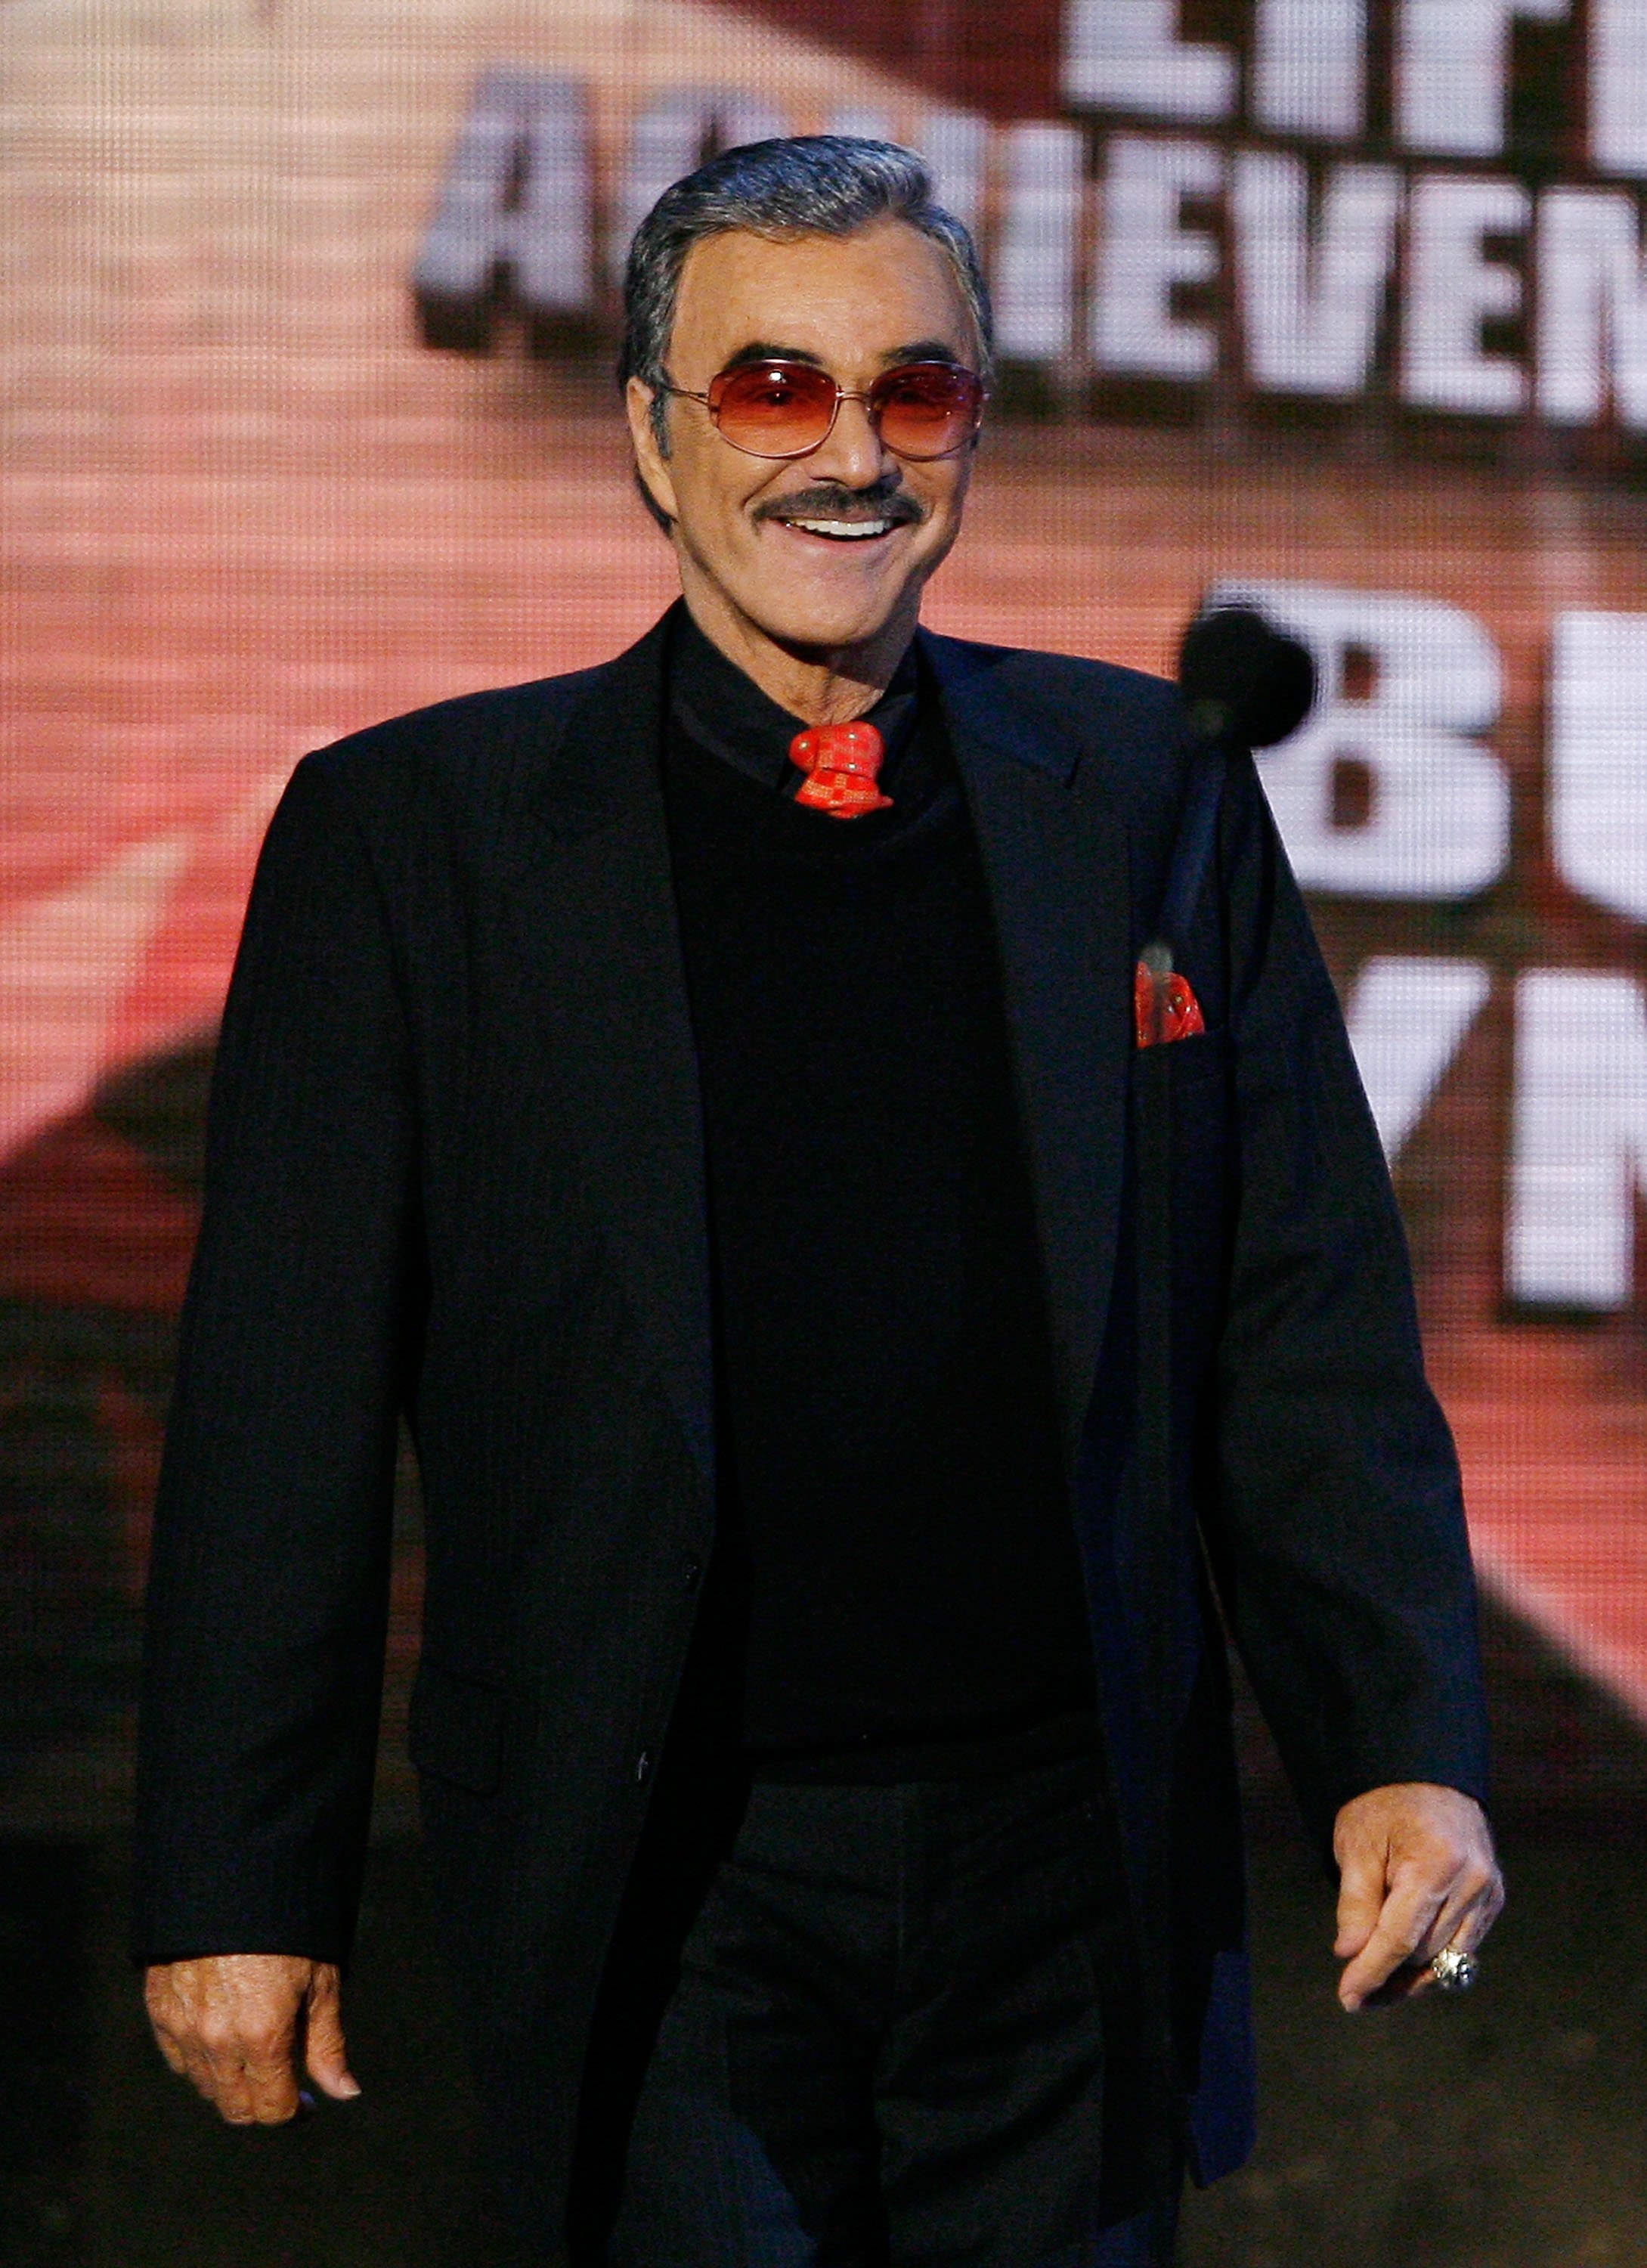 Actor Burt Reynolds accepts the Taurus Lifetime Achievement Award for an Action Movie Star onstage during the 7th Annual Taurus World Stunt Awards at Paramount Pictures on May 20, 2007 in Los Angeles, California. | Source: Getty Images